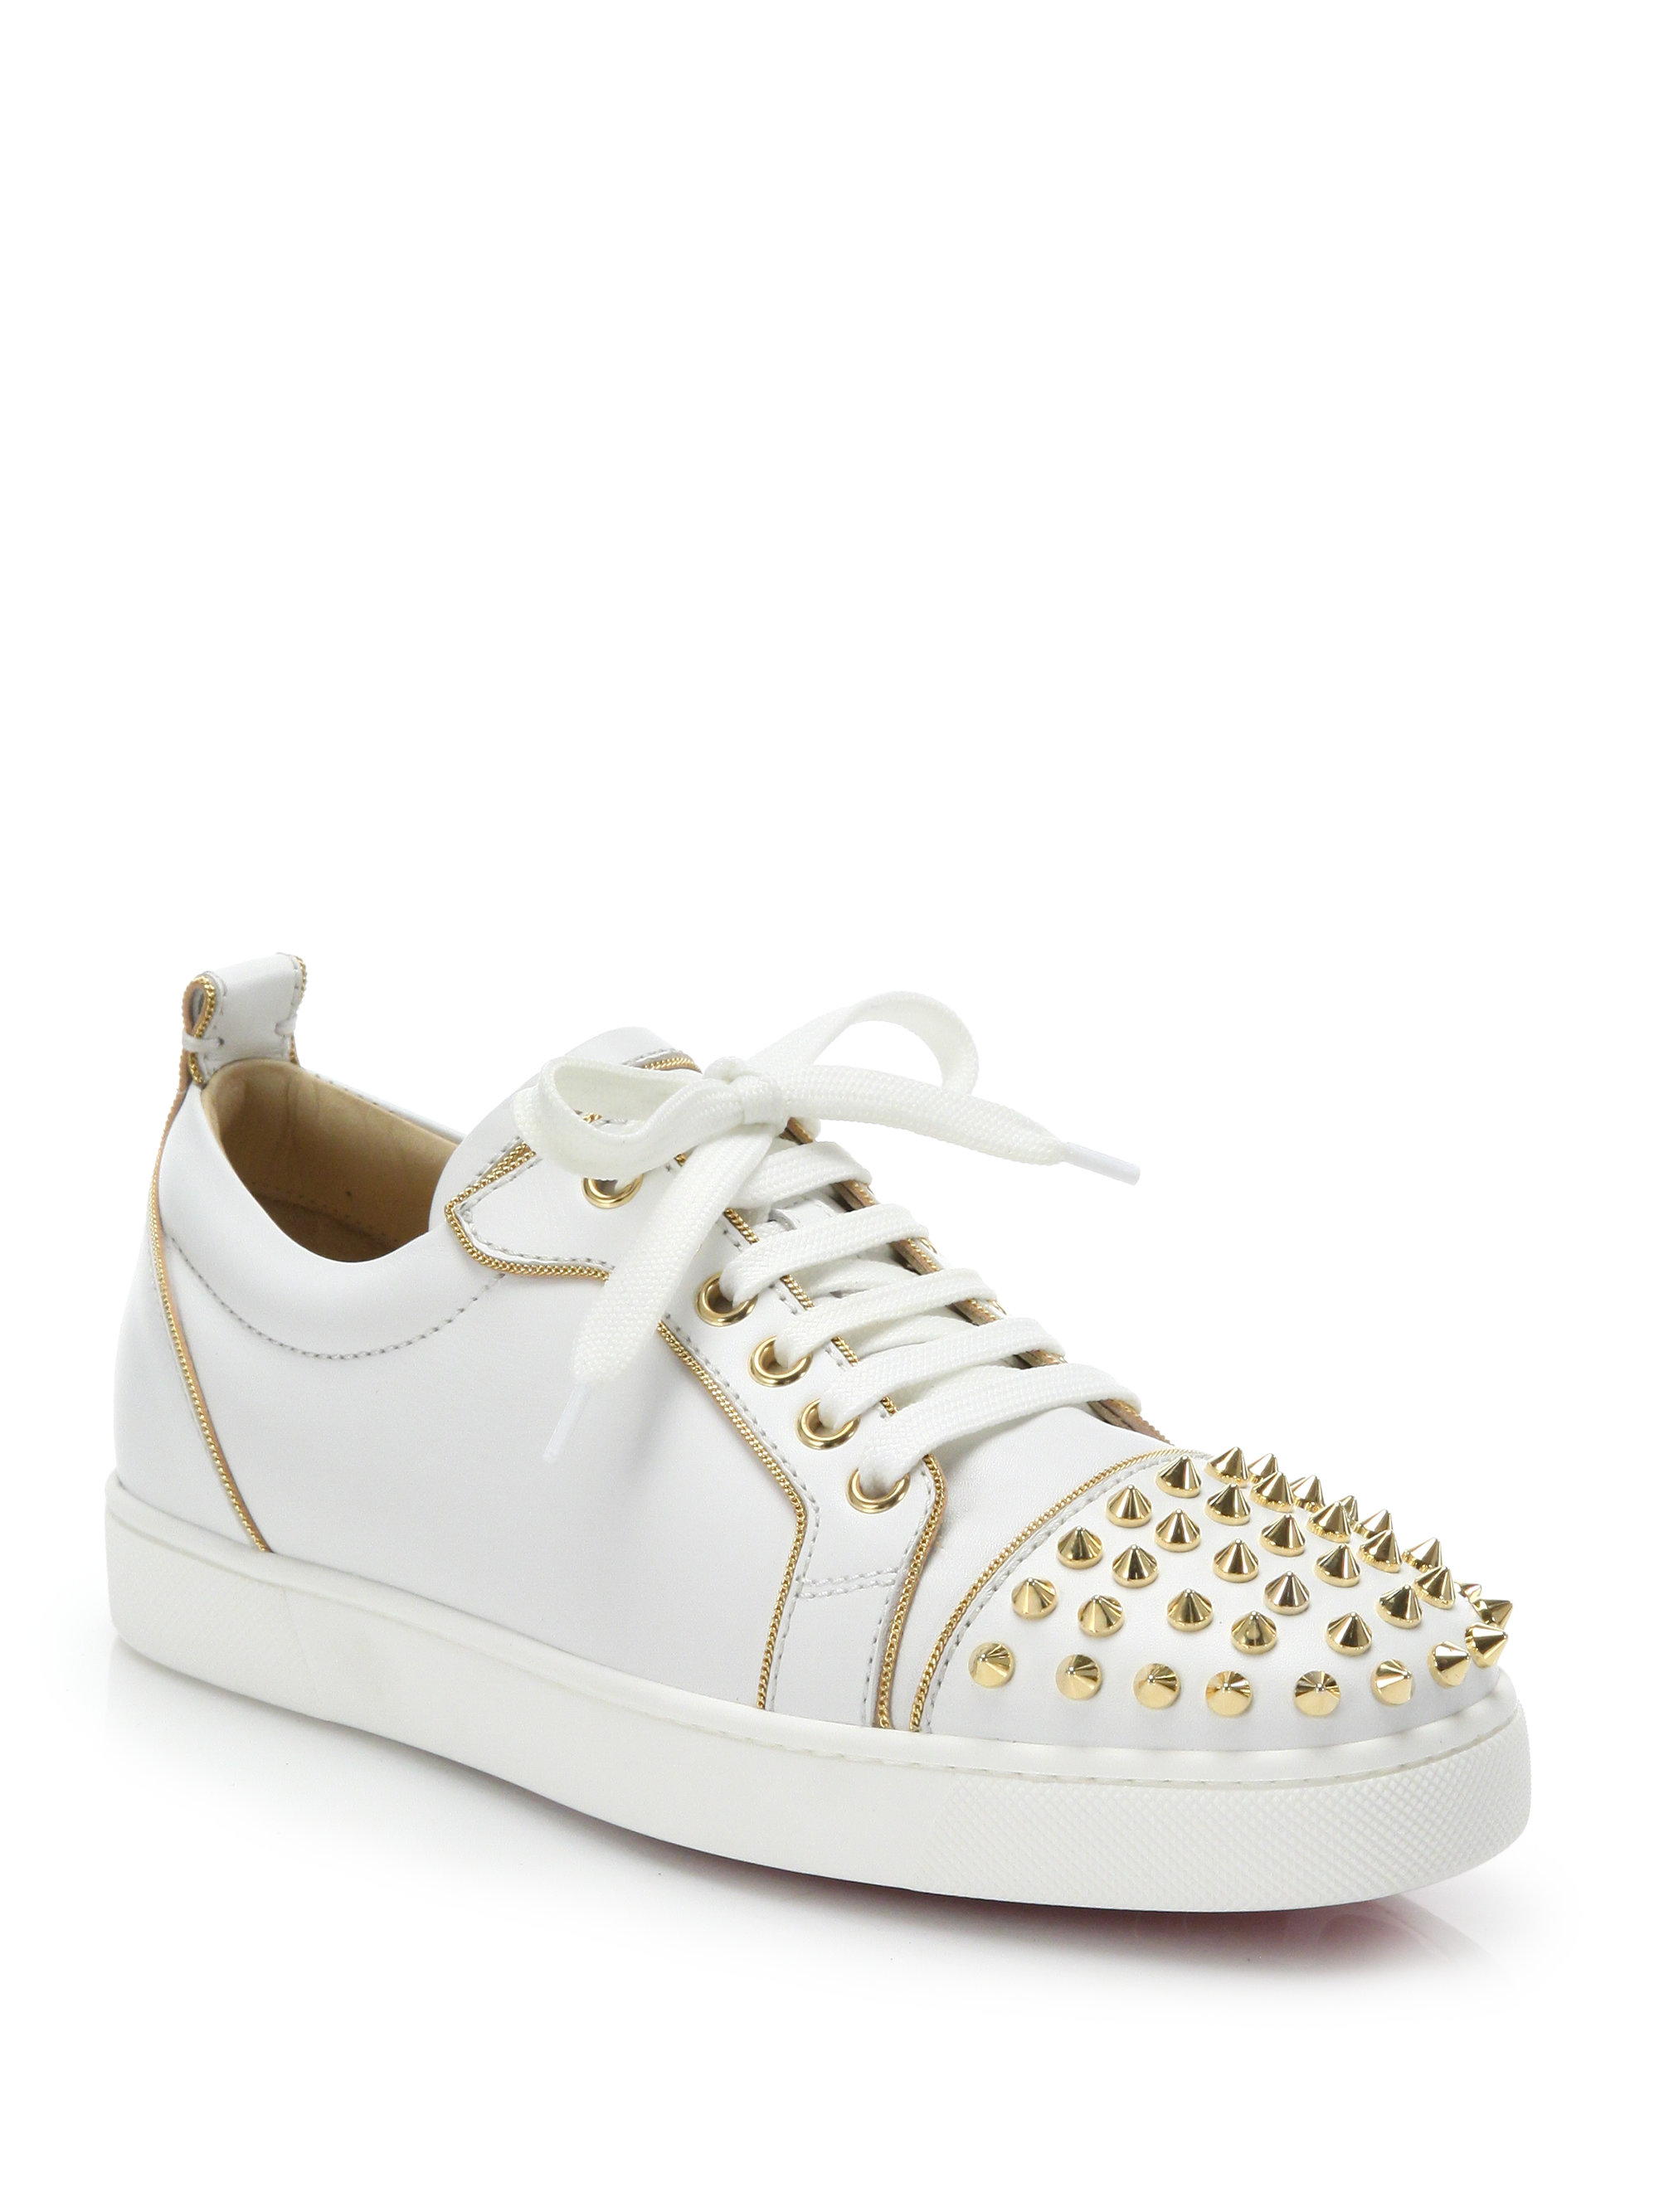 Christian louboutin Rush Studded Leather Sneakers in White | Lyst